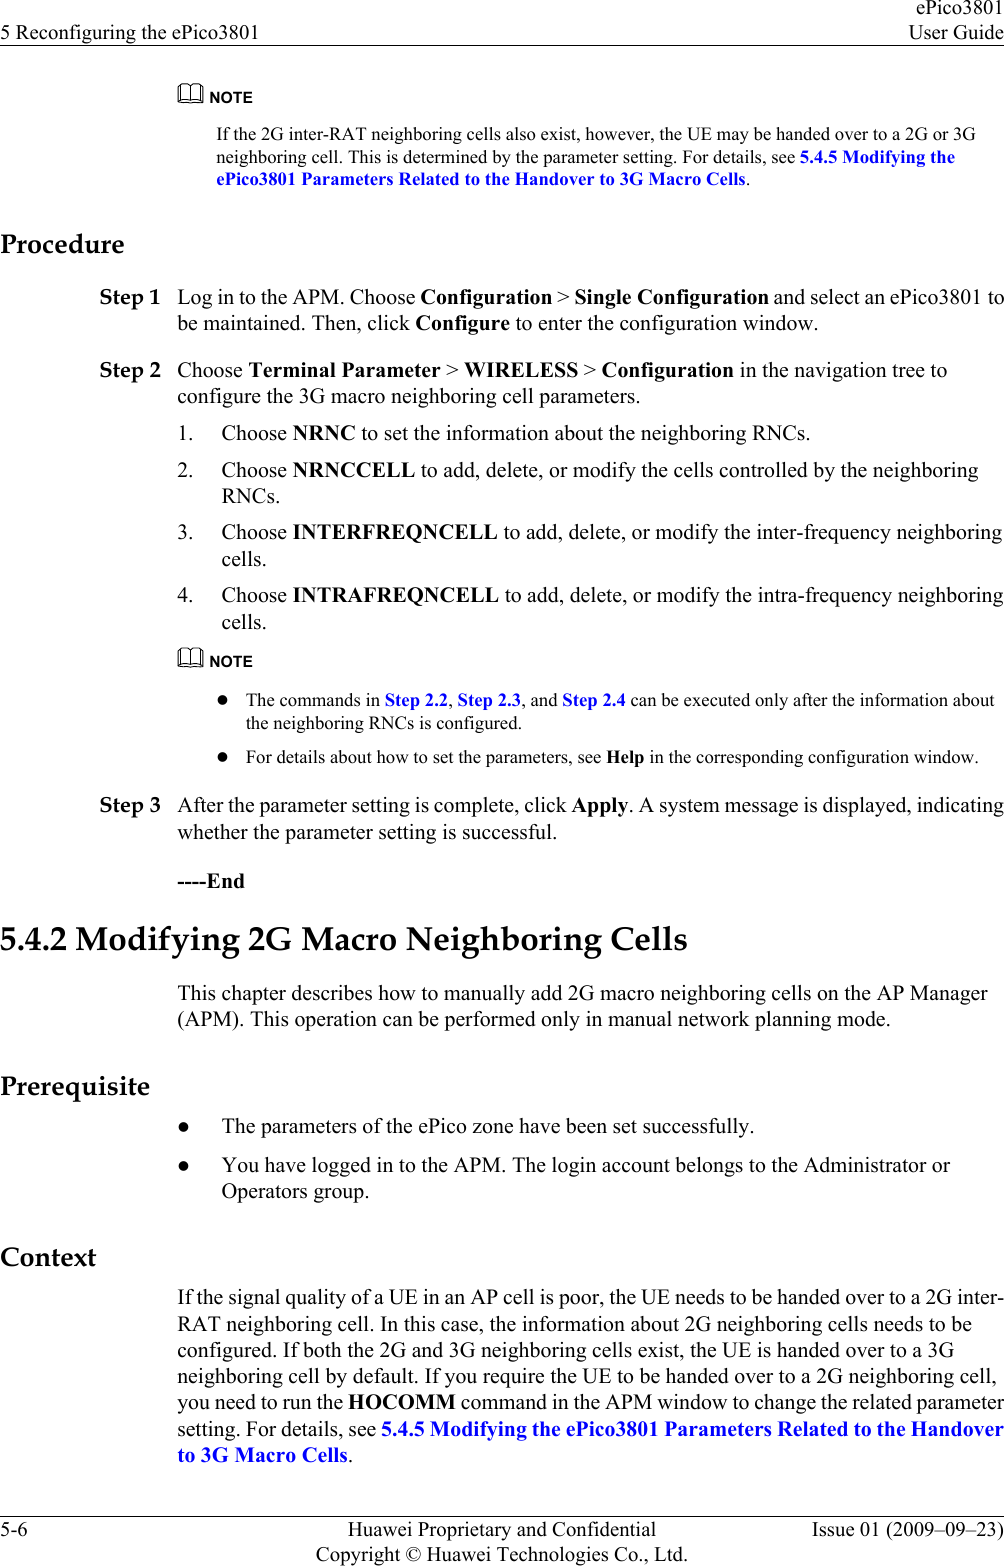 NOTEIf the 2G inter-RAT neighboring cells also exist, however, the UE may be handed over to a 2G or 3Gneighboring cell. This is determined by the parameter setting. For details, see 5.4.5 Modifying theePico3801 Parameters Related to the Handover to 3G Macro Cells.ProcedureStep 1 Log in to the APM. Choose Configuration &gt; Single Configuration and select an ePico3801 tobe maintained. Then, click Configure to enter the configuration window.Step 2 Choose Terminal Parameter &gt; WIRELESS &gt; Configuration in the navigation tree toconfigure the 3G macro neighboring cell parameters.1. Choose NRNC to set the information about the neighboring RNCs.2. Choose NRNCCELL to add, delete, or modify the cells controlled by the neighboringRNCs.3. Choose INTERFREQNCELL to add, delete, or modify the inter-frequency neighboringcells.4. Choose INTRAFREQNCELL to add, delete, or modify the intra-frequency neighboringcells.NOTElThe commands in Step 2.2, Step 2.3, and Step 2.4 can be executed only after the information aboutthe neighboring RNCs is configured.lFor details about how to set the parameters, see Help in the corresponding configuration window.Step 3 After the parameter setting is complete, click Apply. A system message is displayed, indicatingwhether the parameter setting is successful.----End5.4.2 Modifying 2G Macro Neighboring CellsThis chapter describes how to manually add 2G macro neighboring cells on the AP Manager(APM). This operation can be performed only in manual network planning mode.PrerequisitelThe parameters of the ePico zone have been set successfully.lYou have logged in to the APM. The login account belongs to the Administrator orOperators group.ContextIf the signal quality of a UE in an AP cell is poor, the UE needs to be handed over to a 2G inter-RAT neighboring cell. In this case, the information about 2G neighboring cells needs to beconfigured. If both the 2G and 3G neighboring cells exist, the UE is handed over to a 3Gneighboring cell by default. If you require the UE to be handed over to a 2G neighboring cell,you need to run the HOCOMM command in the APM window to change the related parametersetting. For details, see 5.4.5 Modifying the ePico3801 Parameters Related to the Handoverto 3G Macro Cells.5 Reconfiguring the ePico3801ePico3801User Guide5-6 Huawei Proprietary and ConfidentialCopyright © Huawei Technologies Co., Ltd.Issue 01 (2009–09–23)